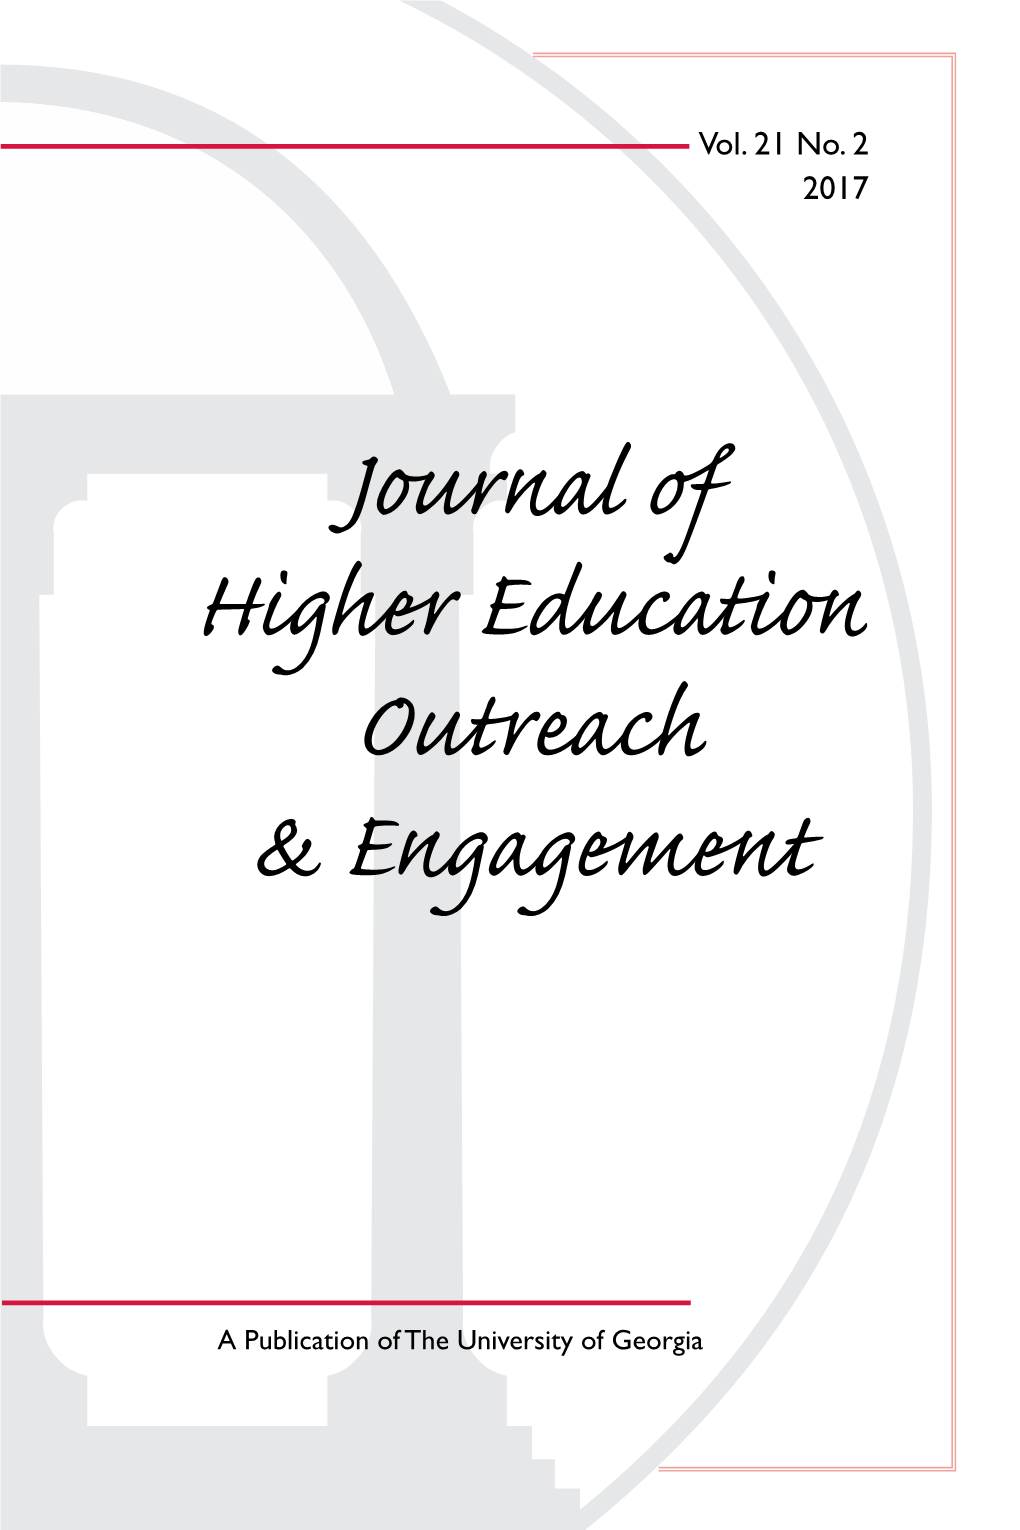 Journal of Higher Education Outreach & Engagement